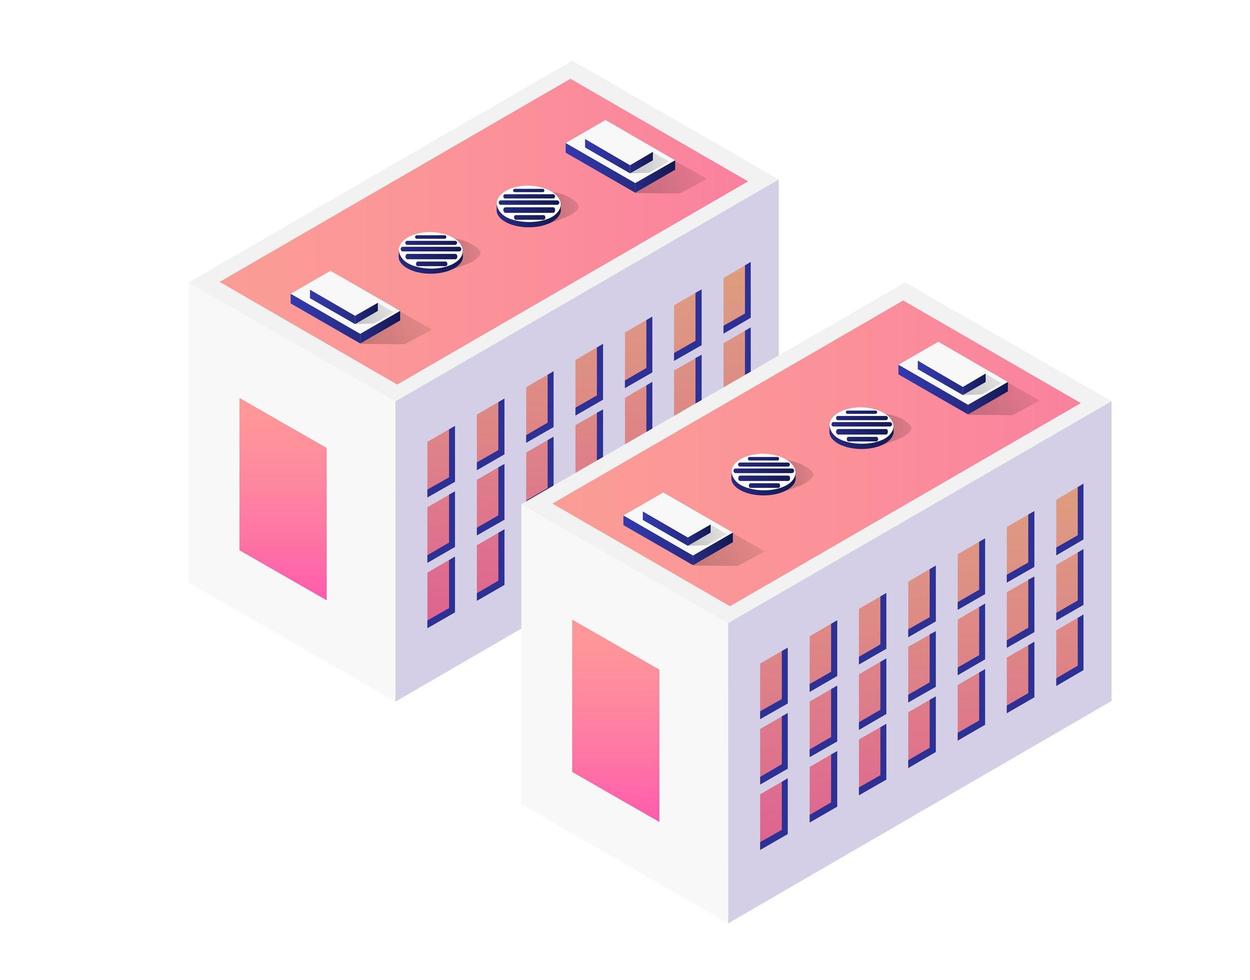 Vector isometric urban architecture single building of the modern